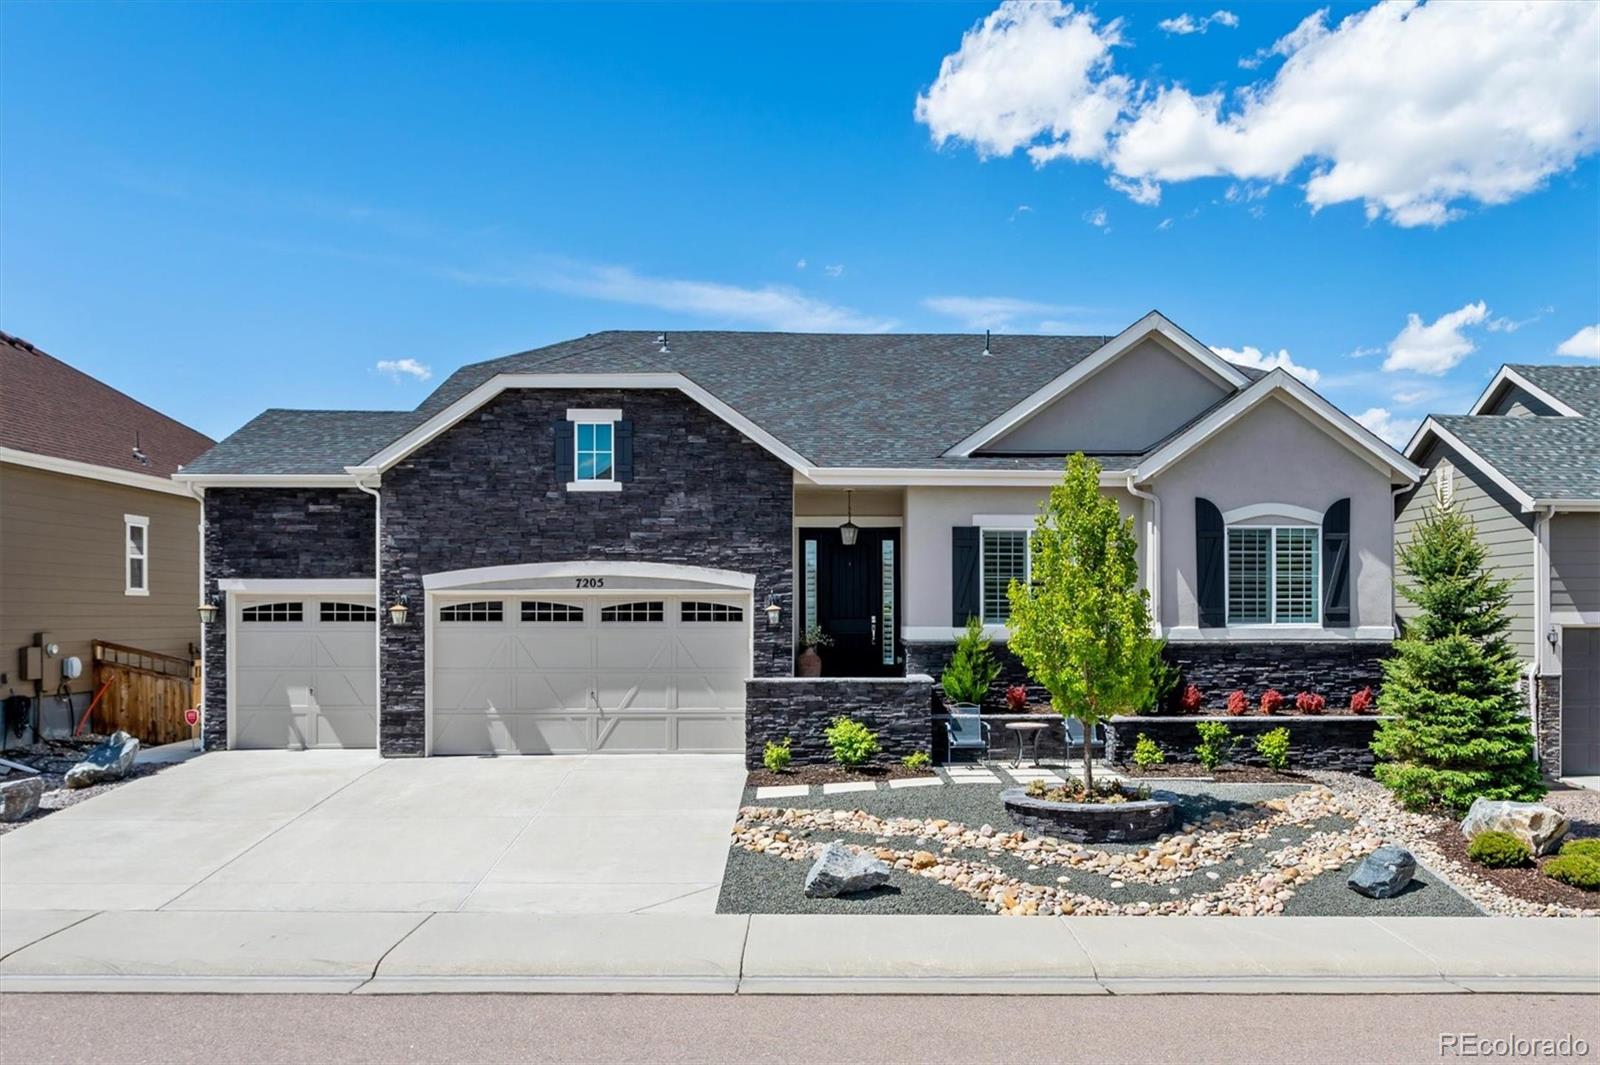 7205  Greenwater Circle, castle rock MLS: 5397959 Beds: 3 Baths: 4 Price: $985,000